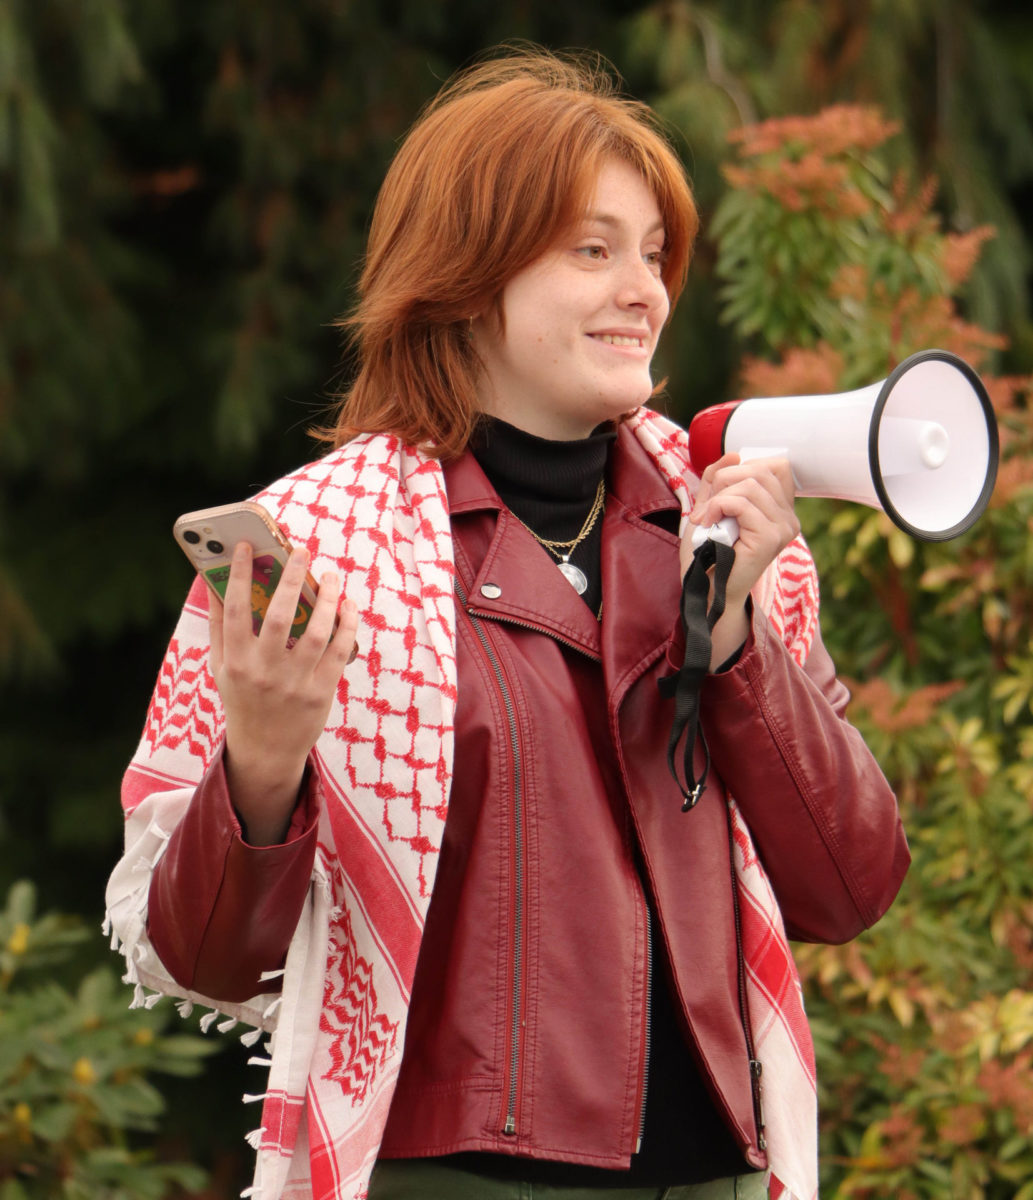 MTHS senior Annabelle Westby gives a speech to participating protesters regarding her stance on the Israel-Palestine conflict before they begin the protest march.